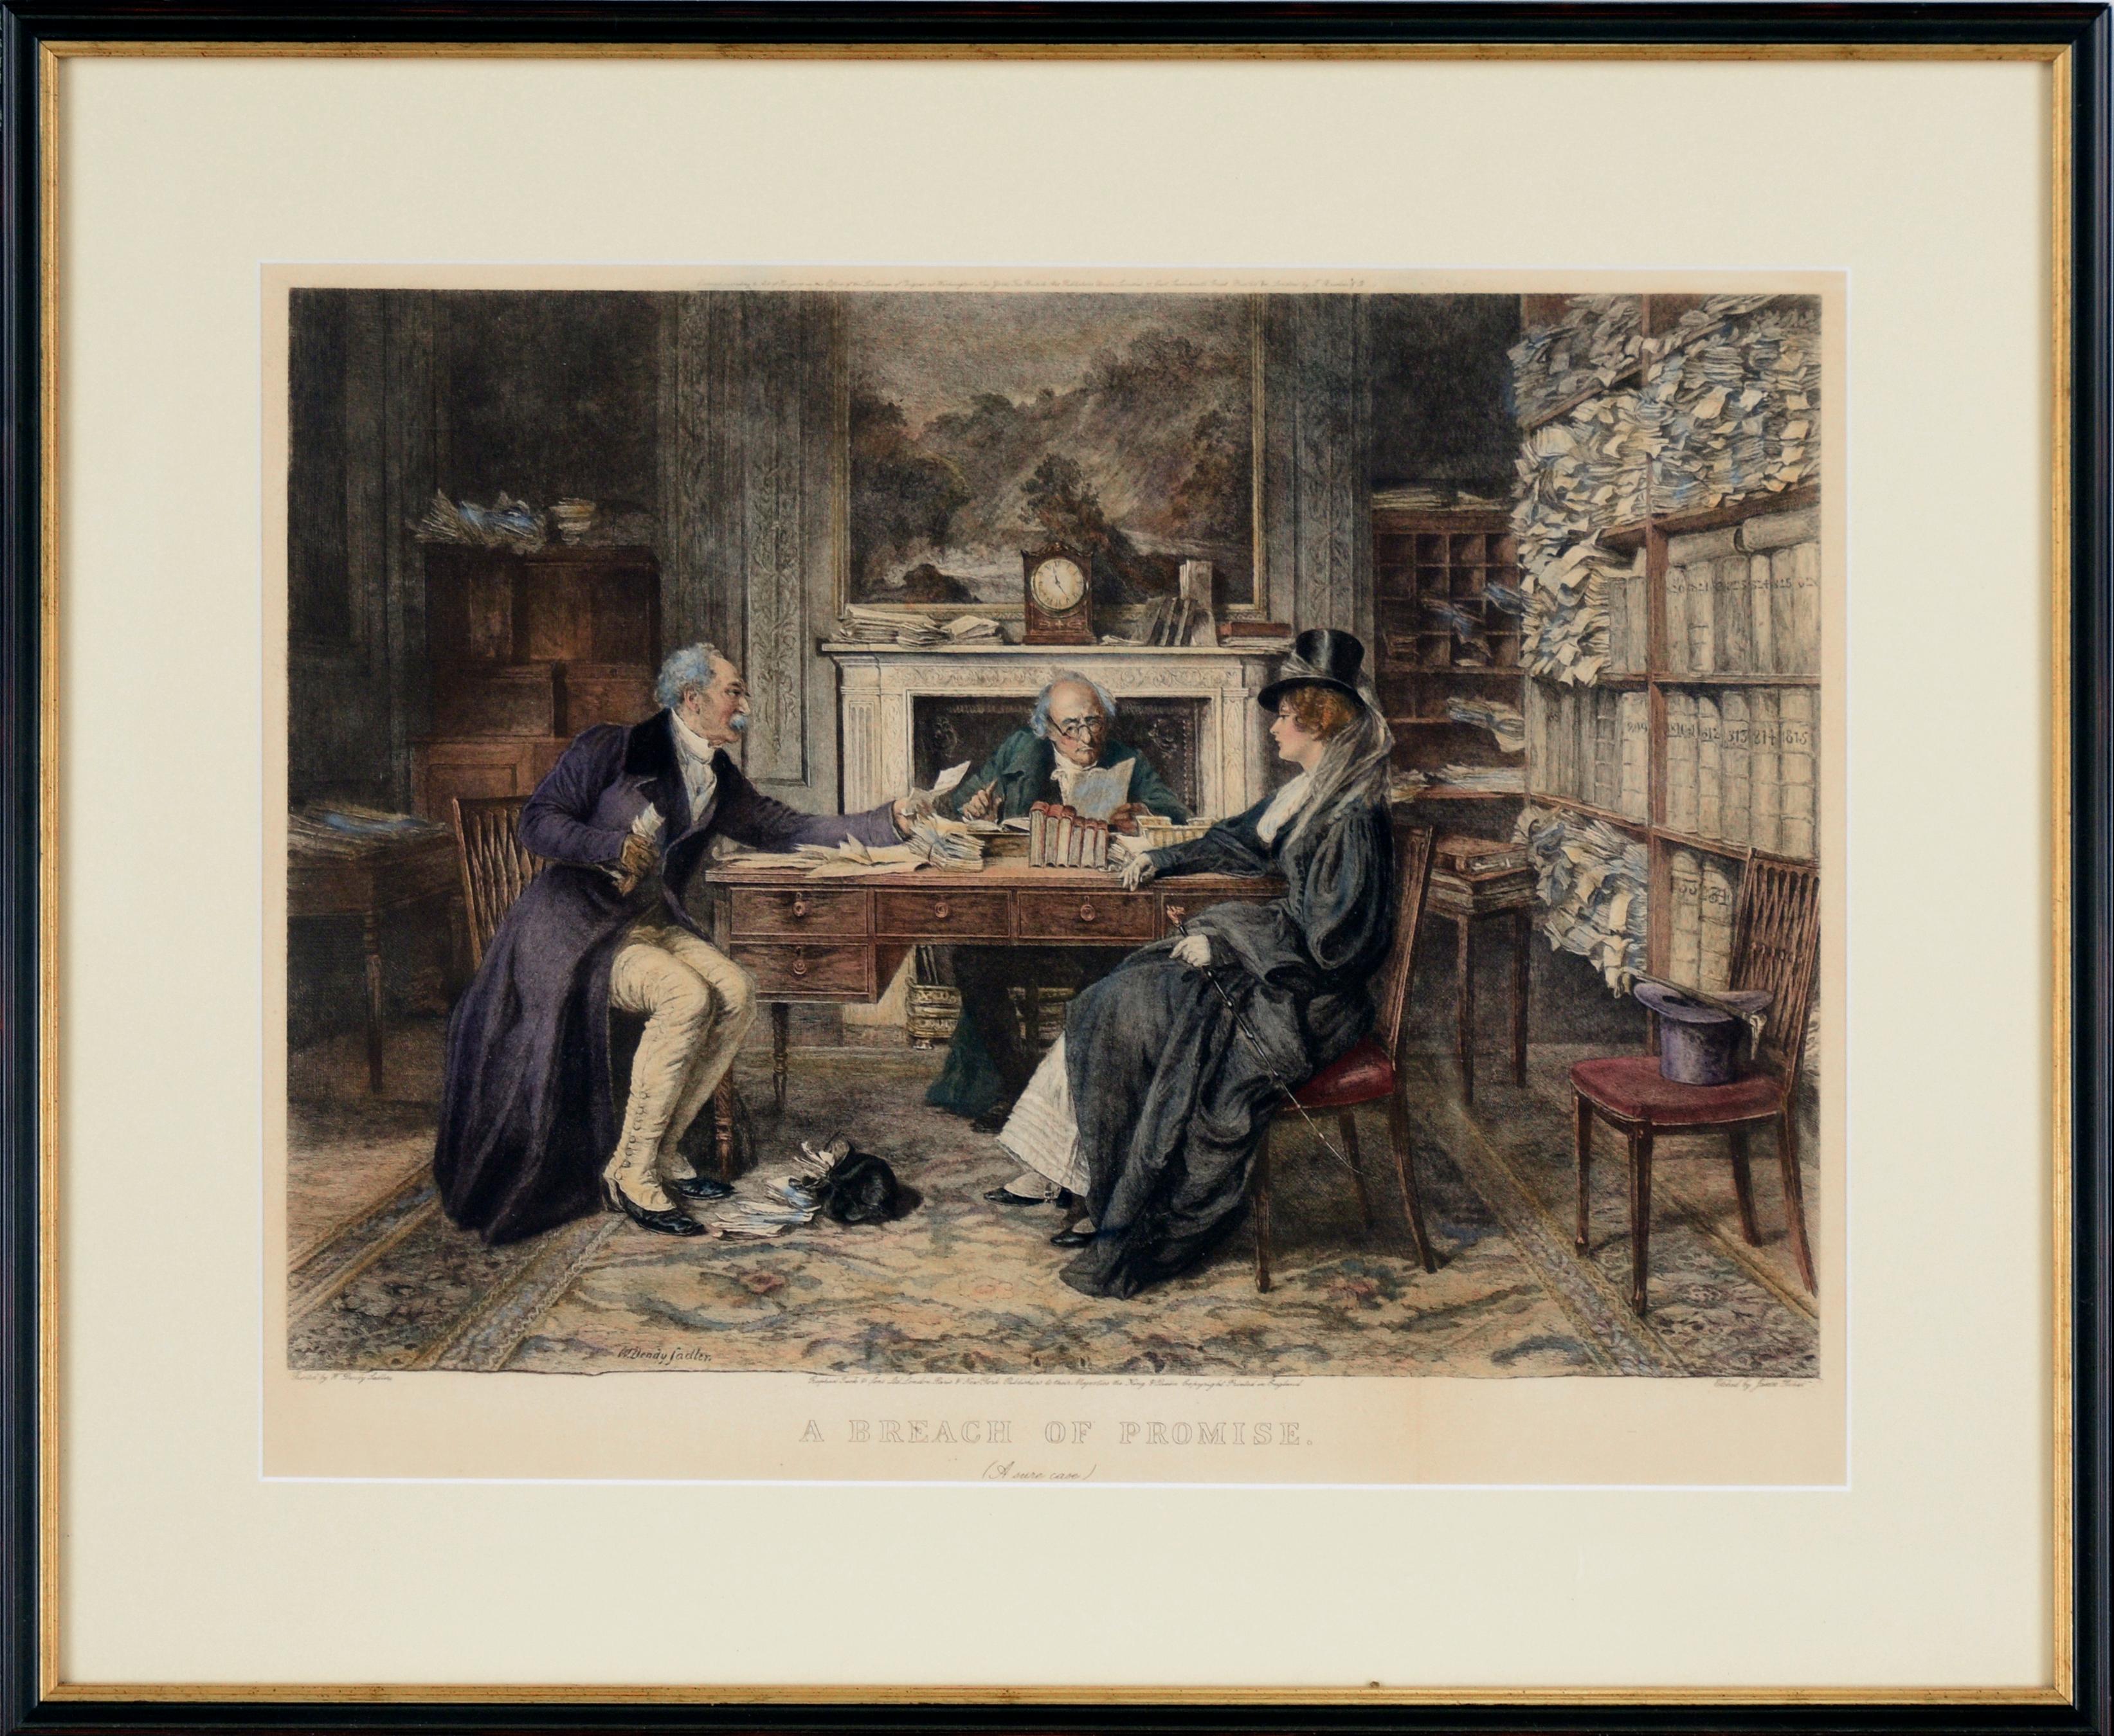 James Dobie Interior Art - A Breach of Promise - Hand Colored Etching on Paper 1900 Victorian 